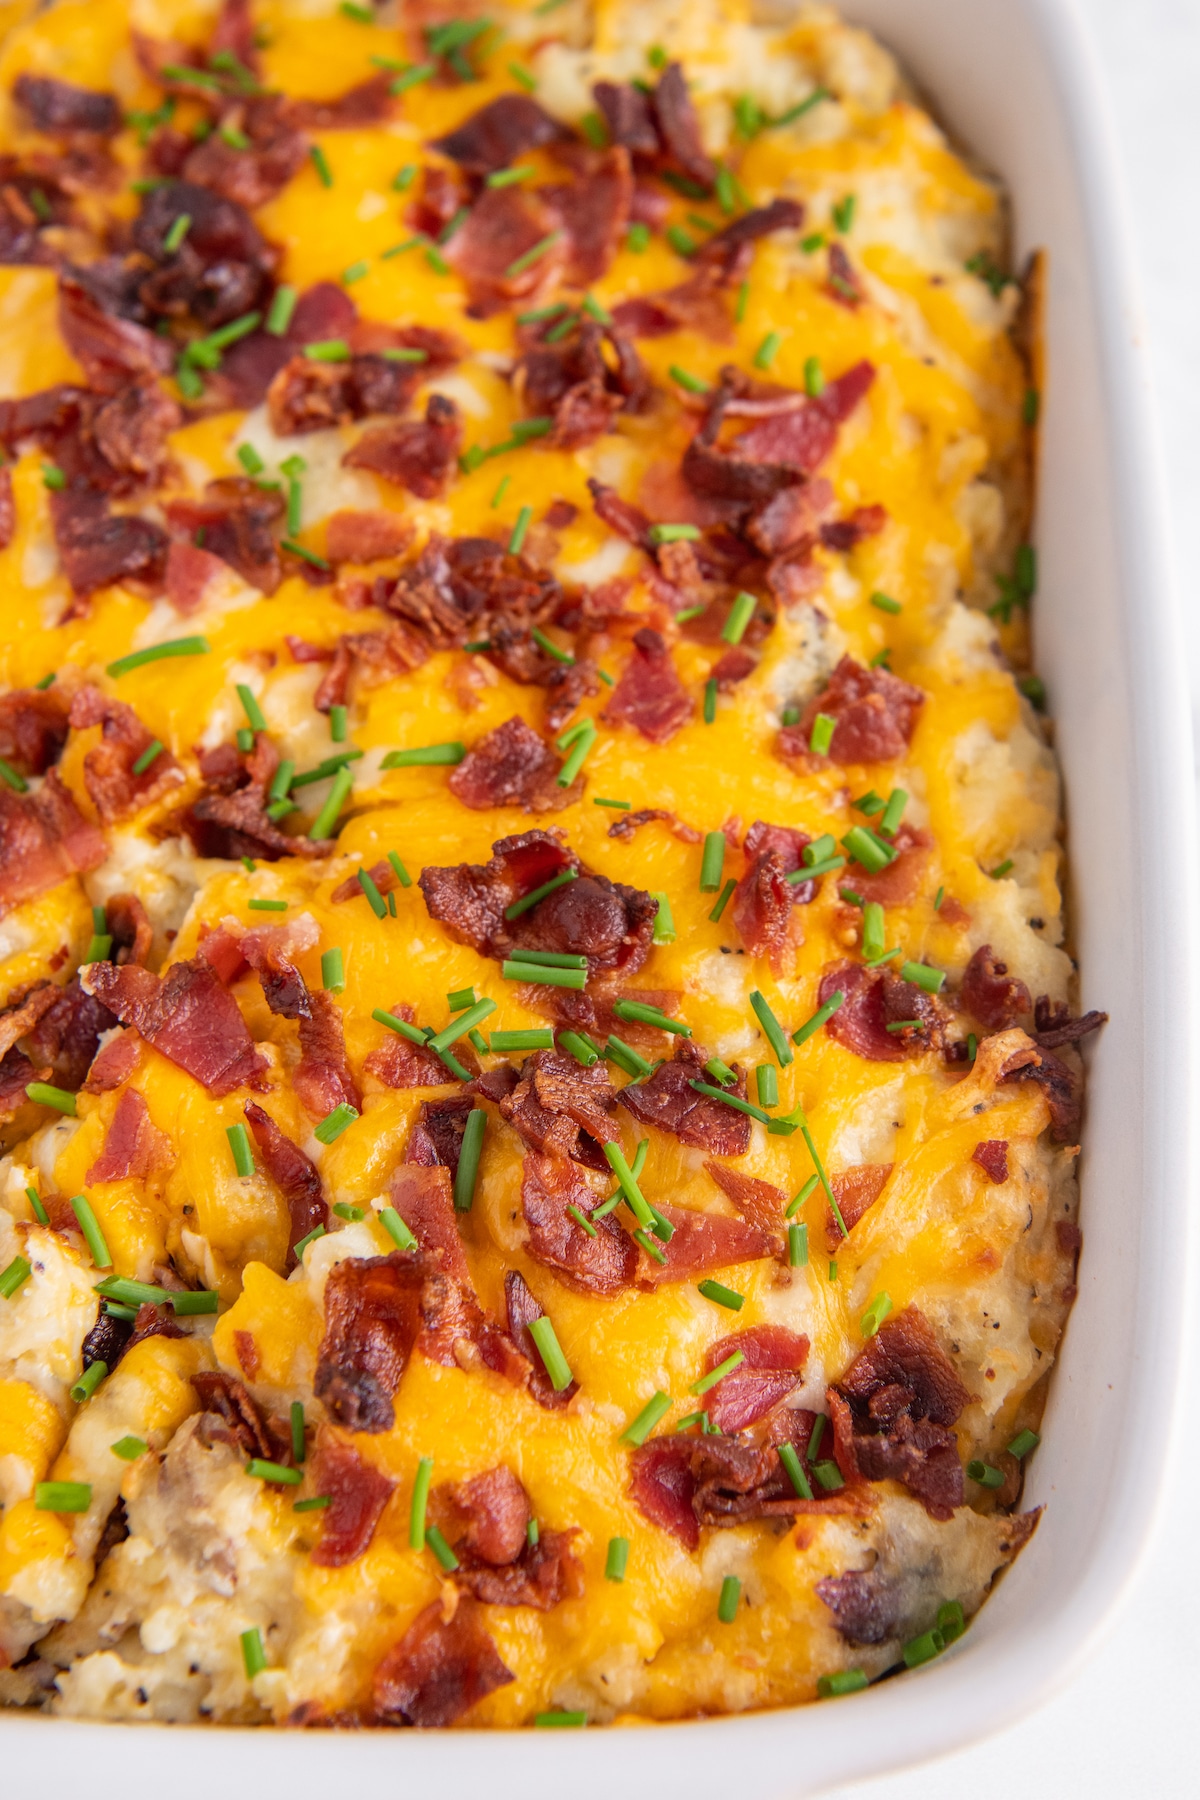 Twice baked potato casserole in a white casserole dish with chives on top.